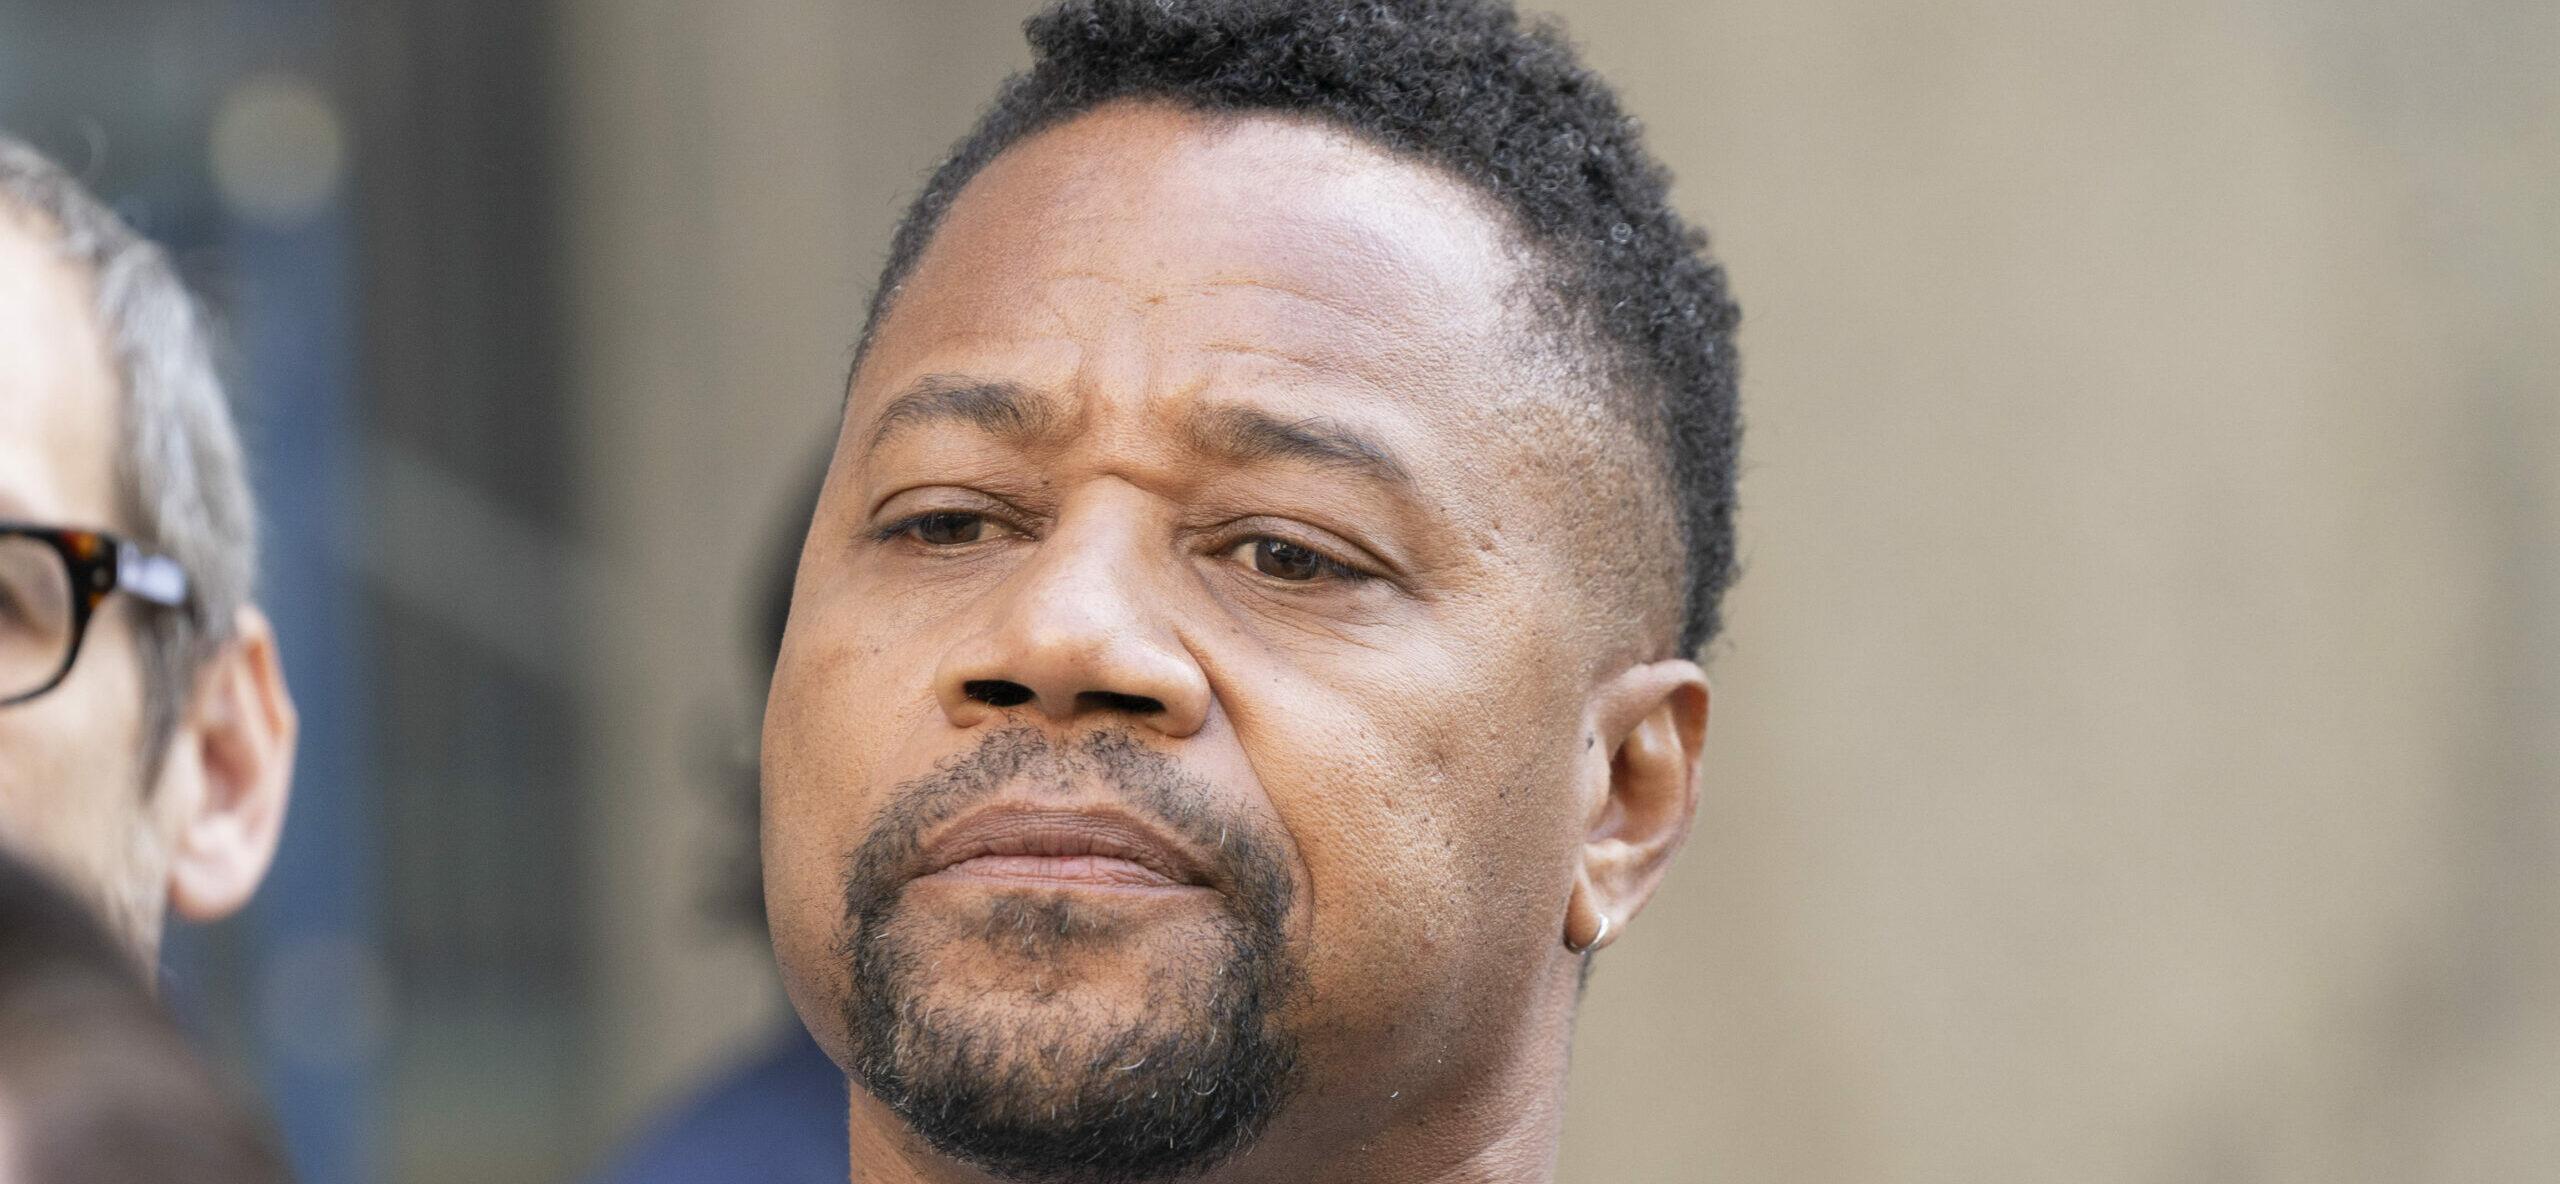 October 15, 2019, New York, United States: Actor Cuba Gooding Jr. listens as attorney Mark Heller addresses press after arraignment in Manhattan's New York State Supreme Court. 15 Oct 2019